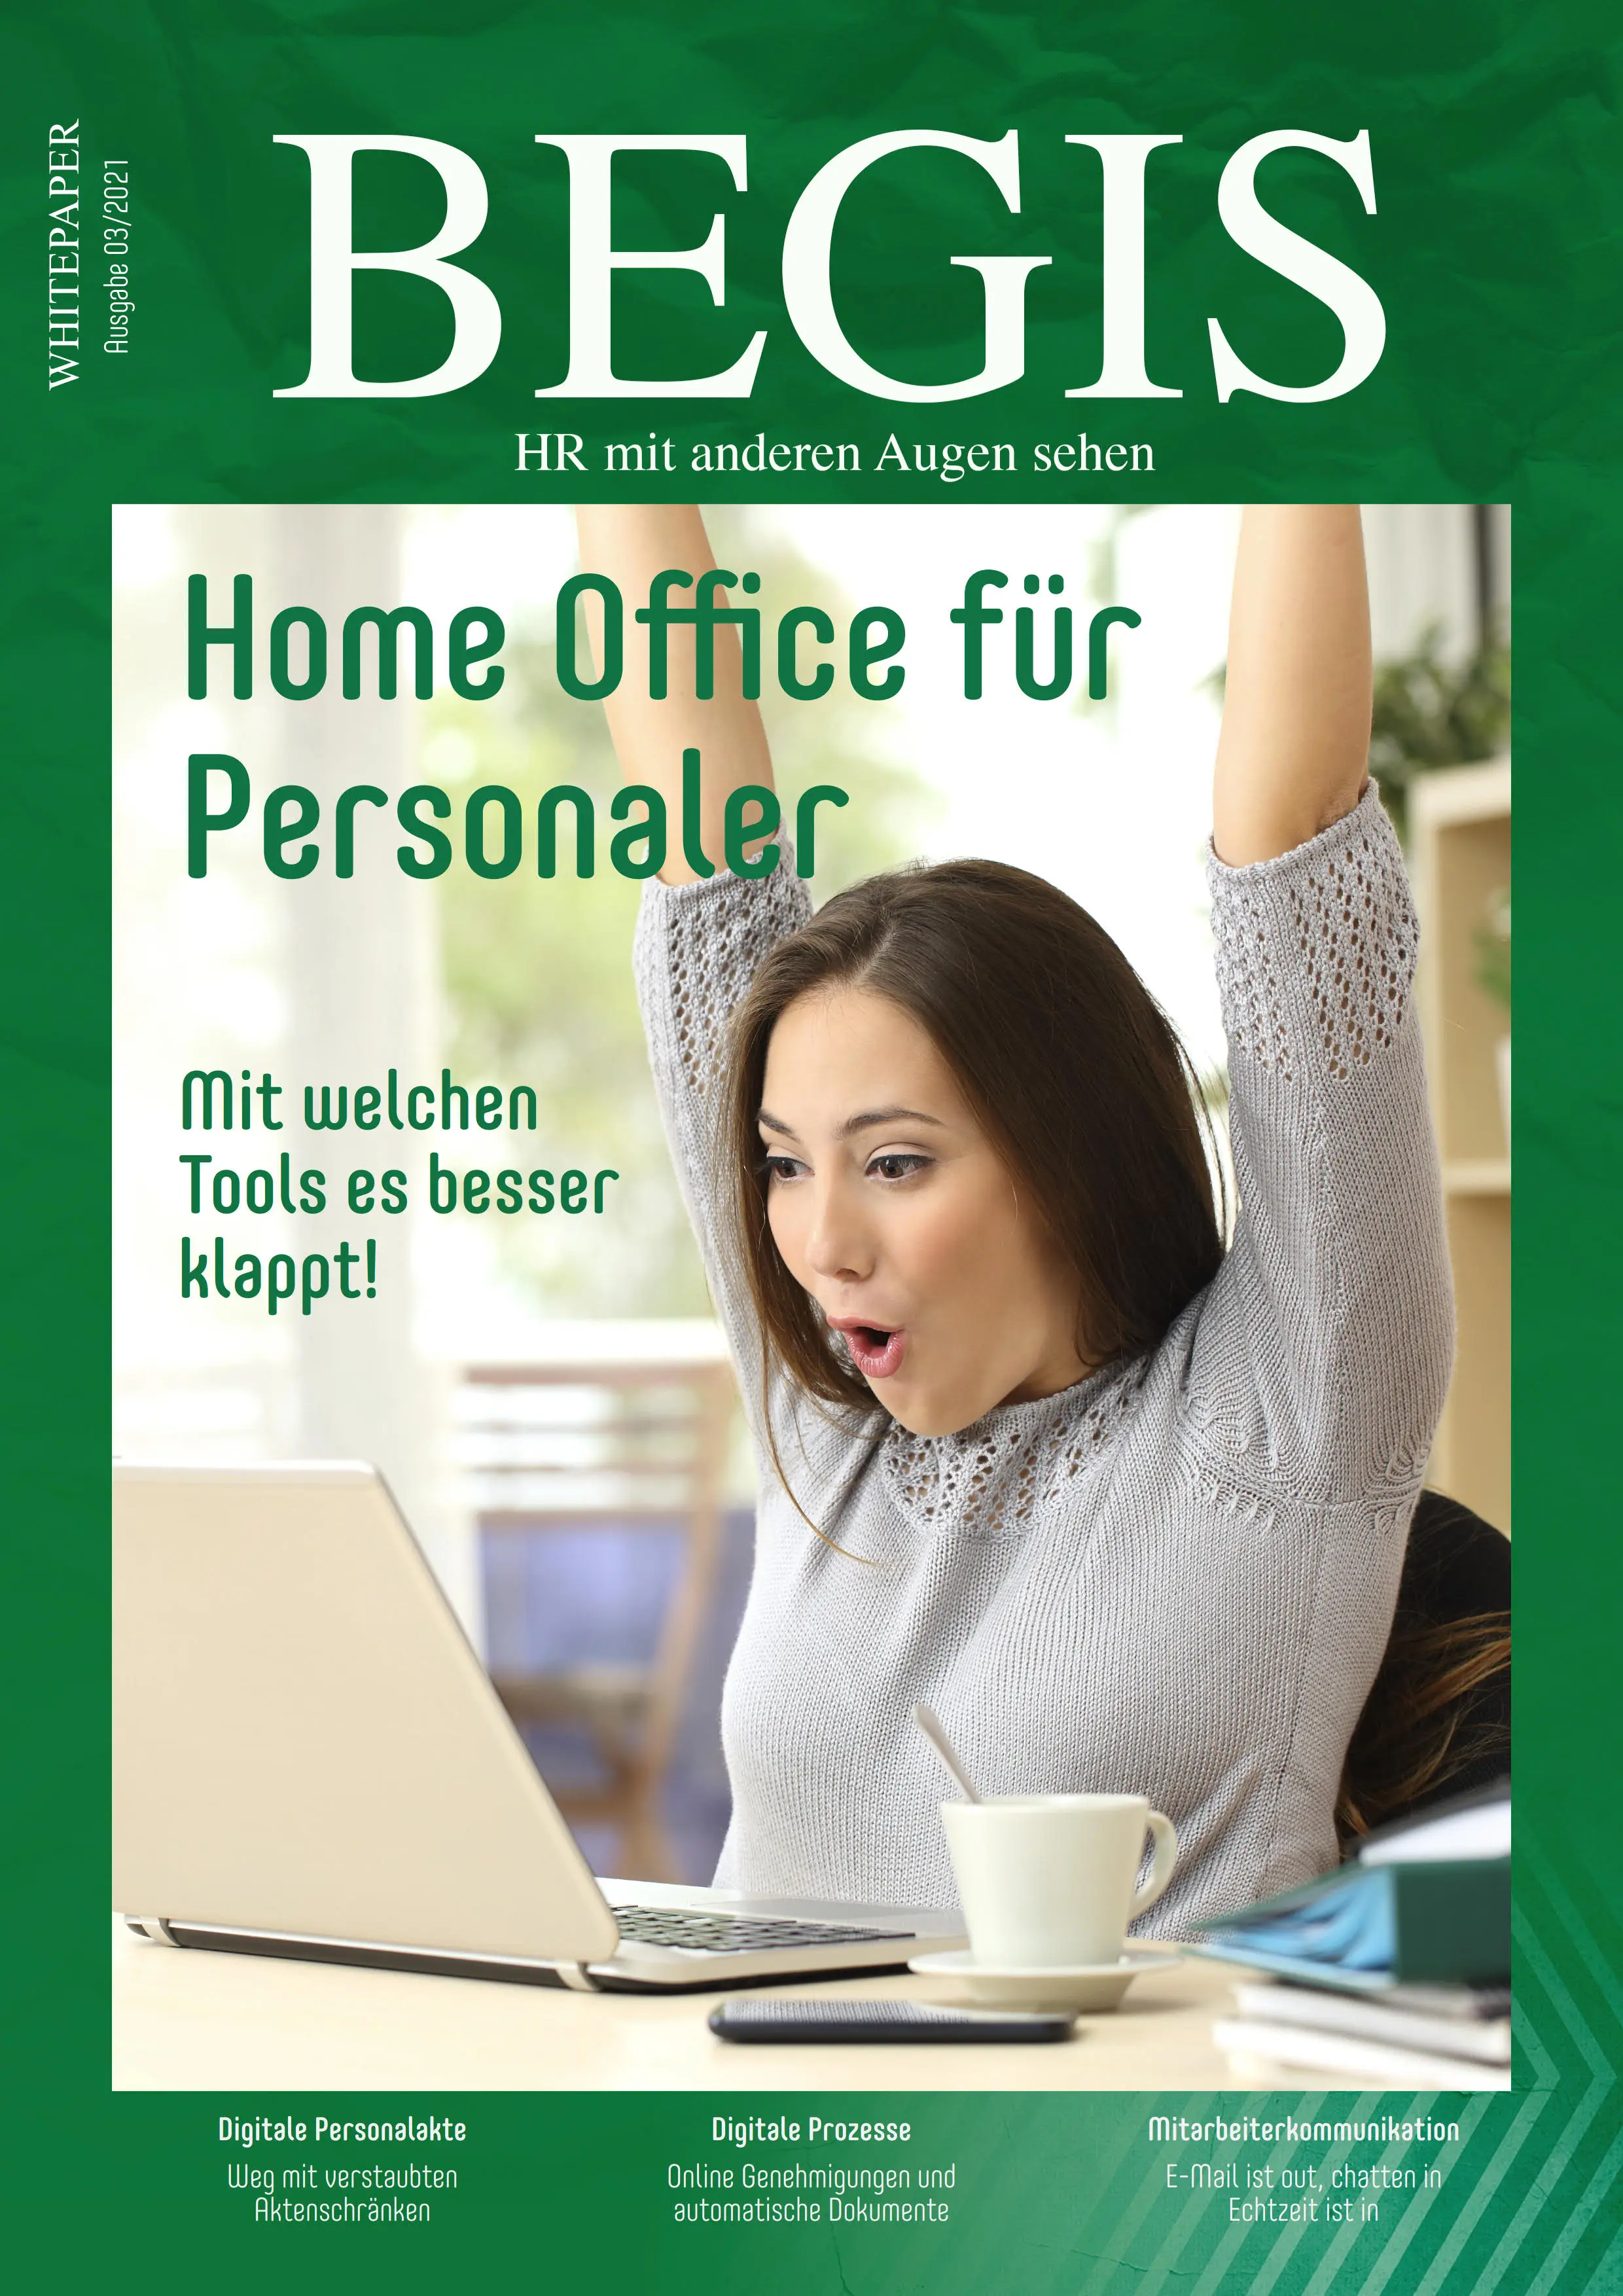 2021 03 Home Office fuer Personaler scaled